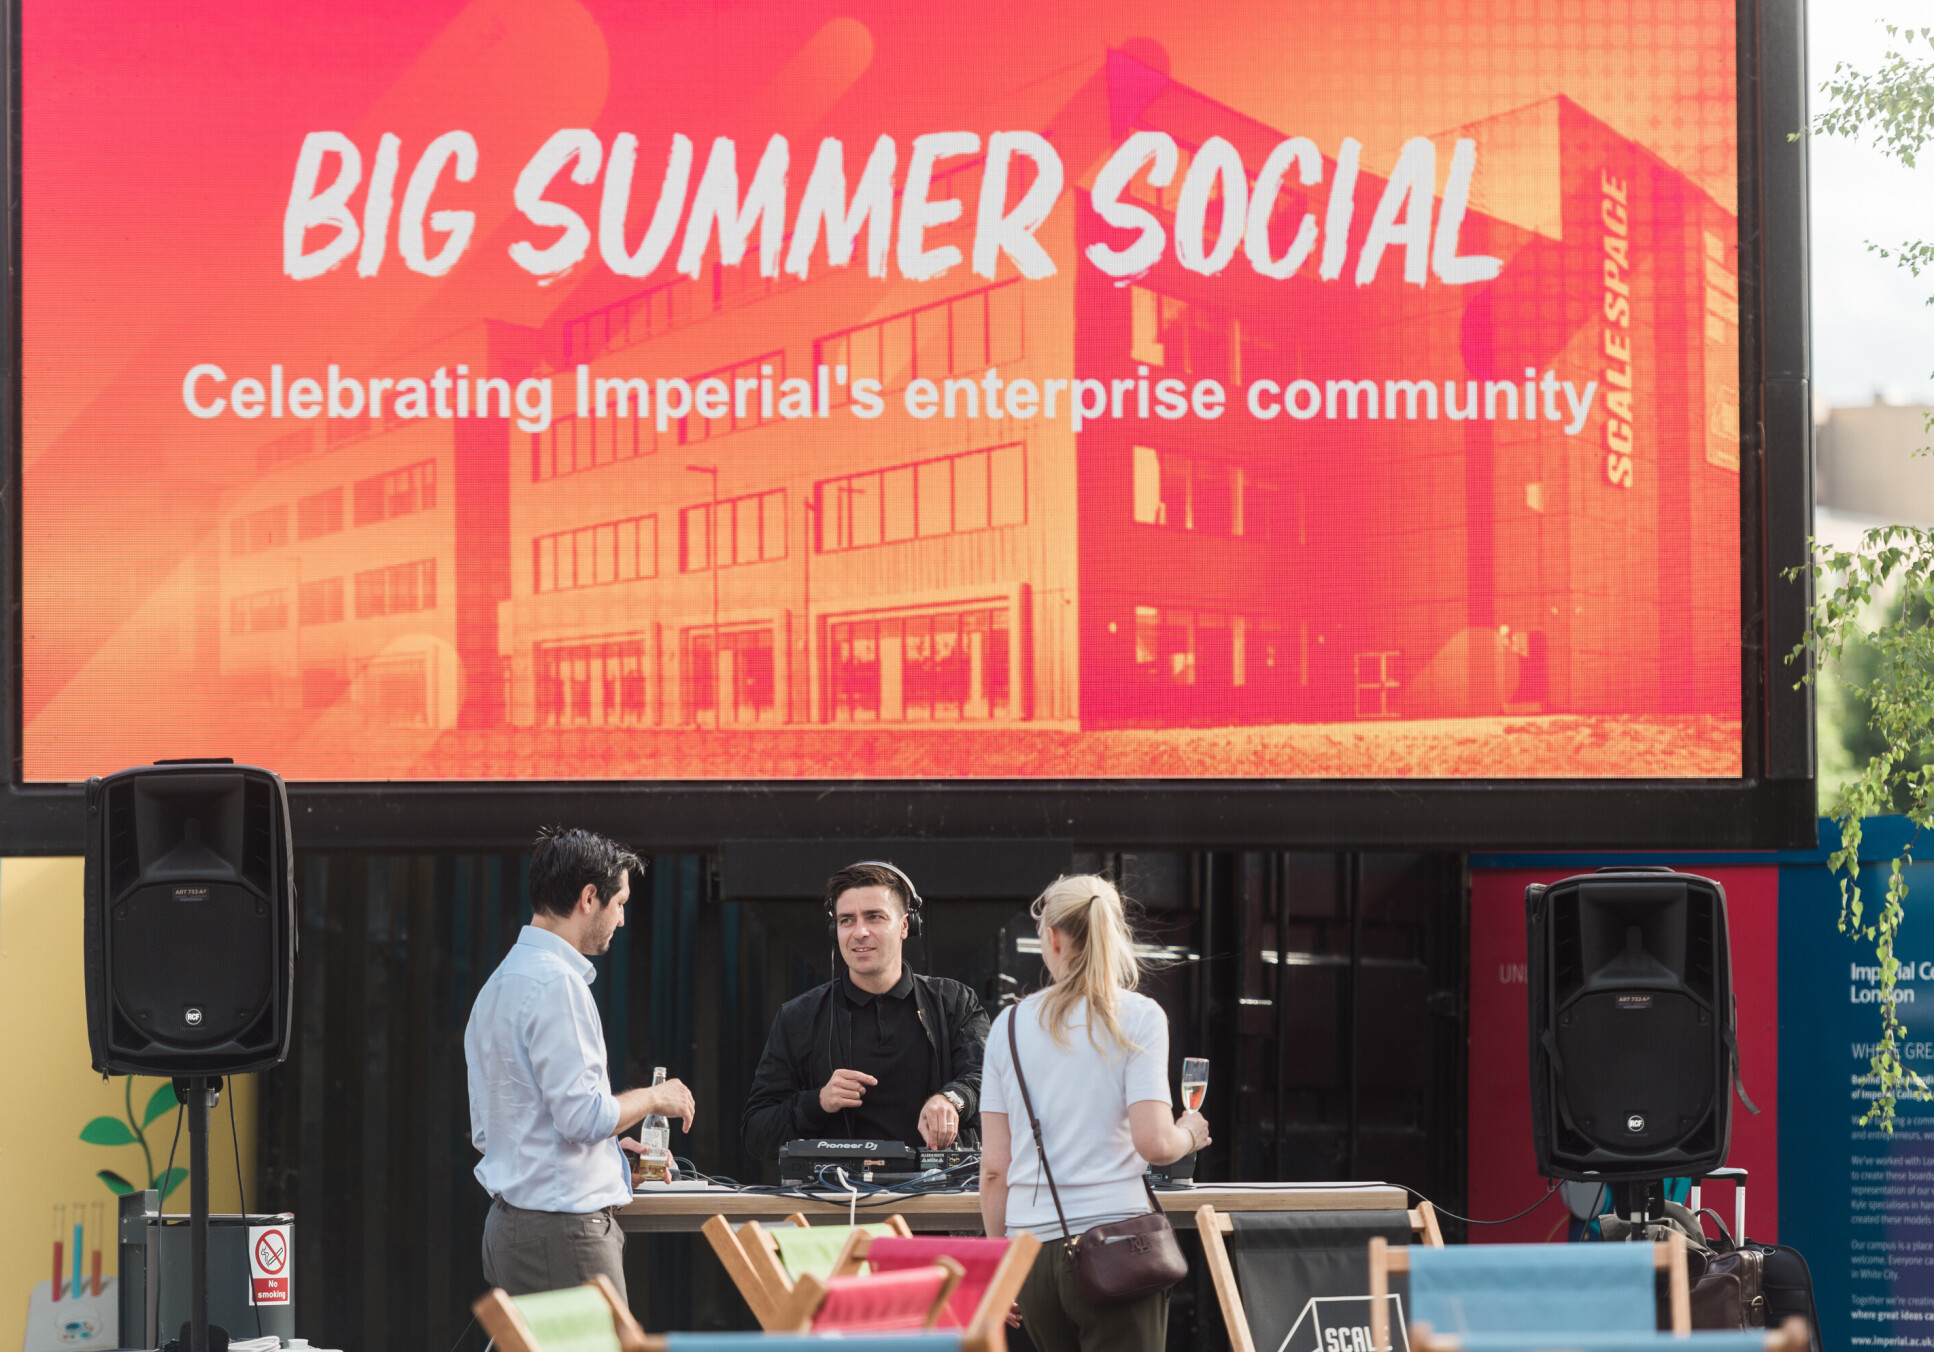 A large screen shows the text 'Big Summer Social - Celebrating Imperial's enterprise community'. 